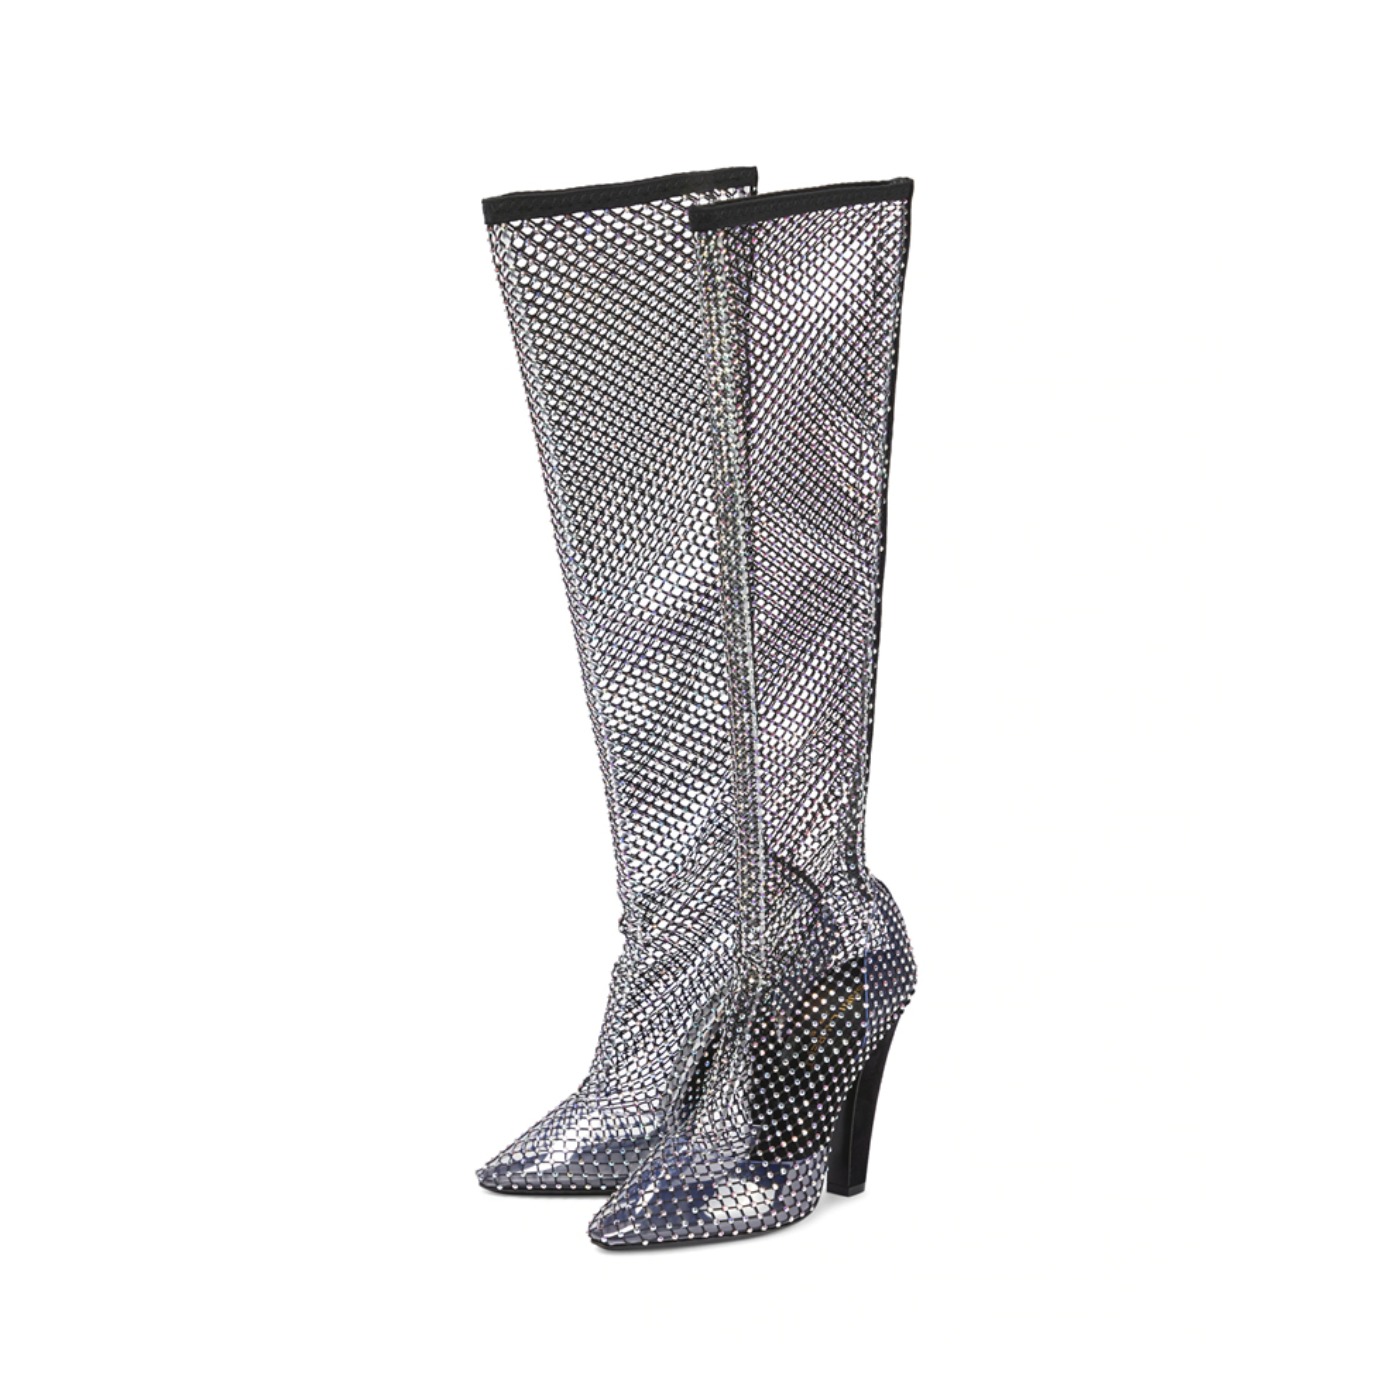 Crystal net boots